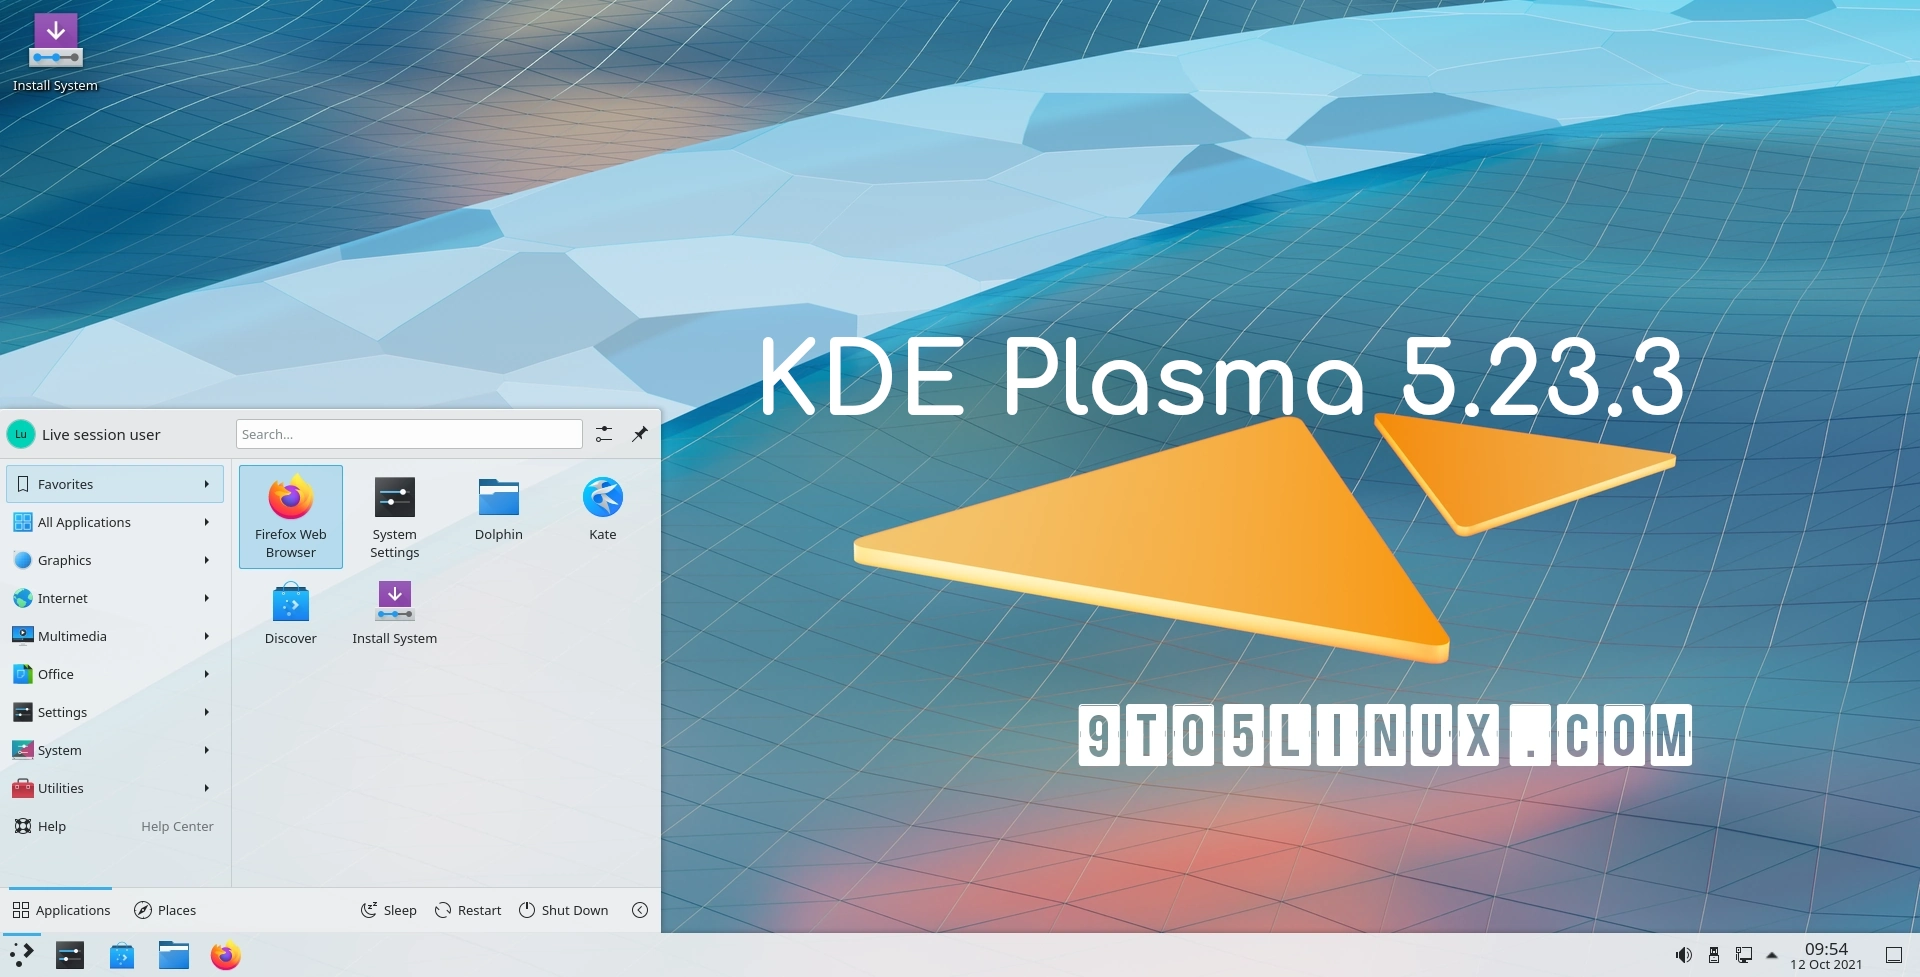 KDE Plasma 5.23.3 Further Improves the Wayland Session, Ports Plasma 5.24’s Focus Ring Feature